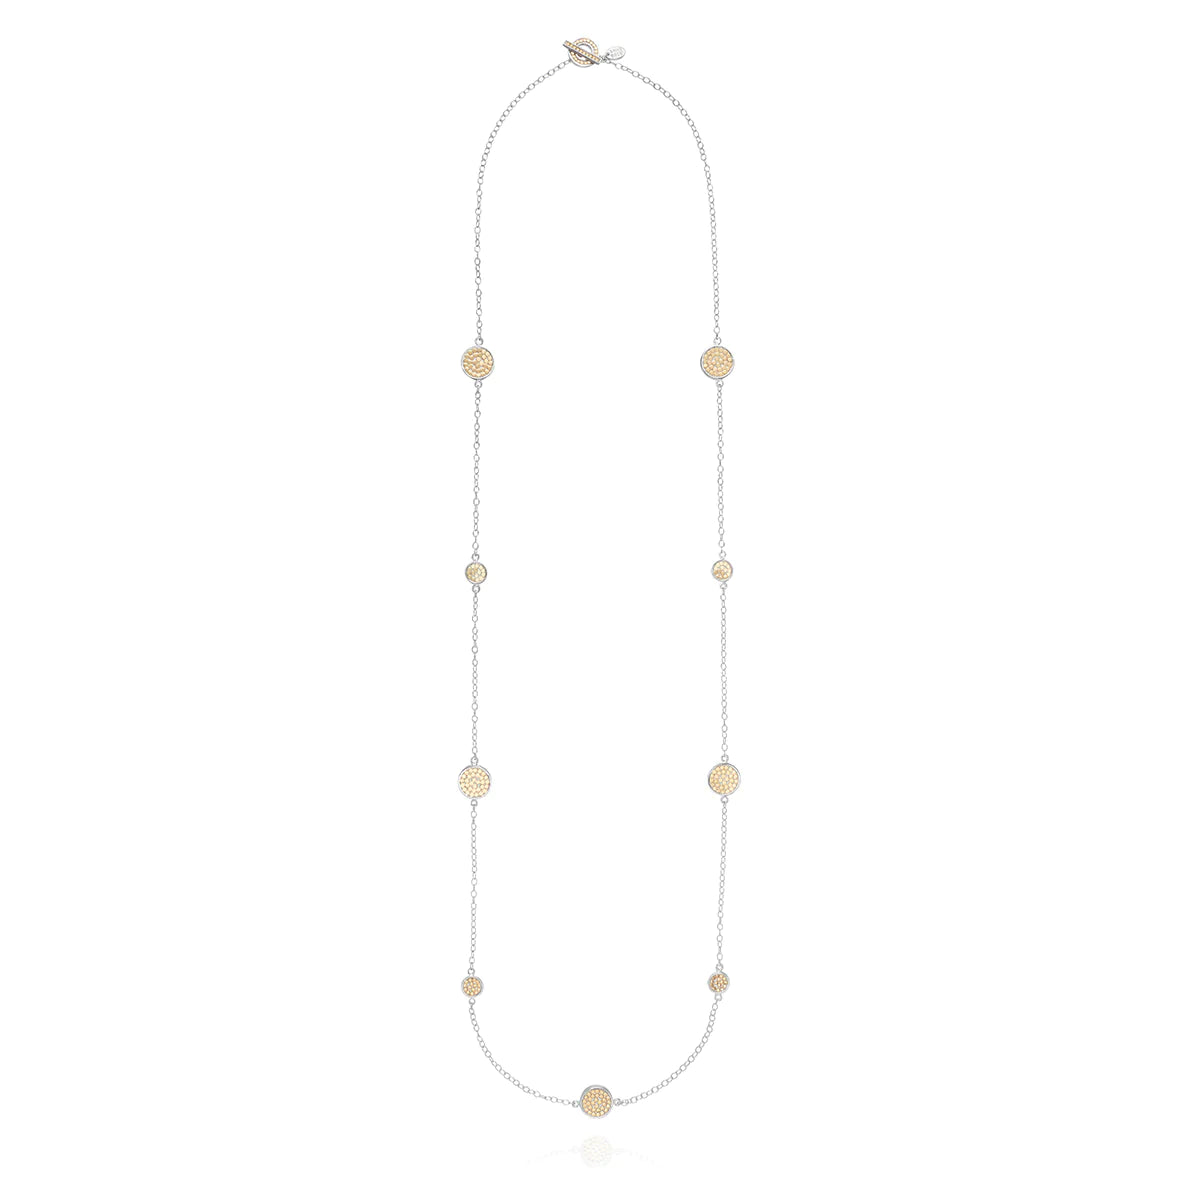 Long silver station necklace with alternating small and medium silver discs with gold dot details